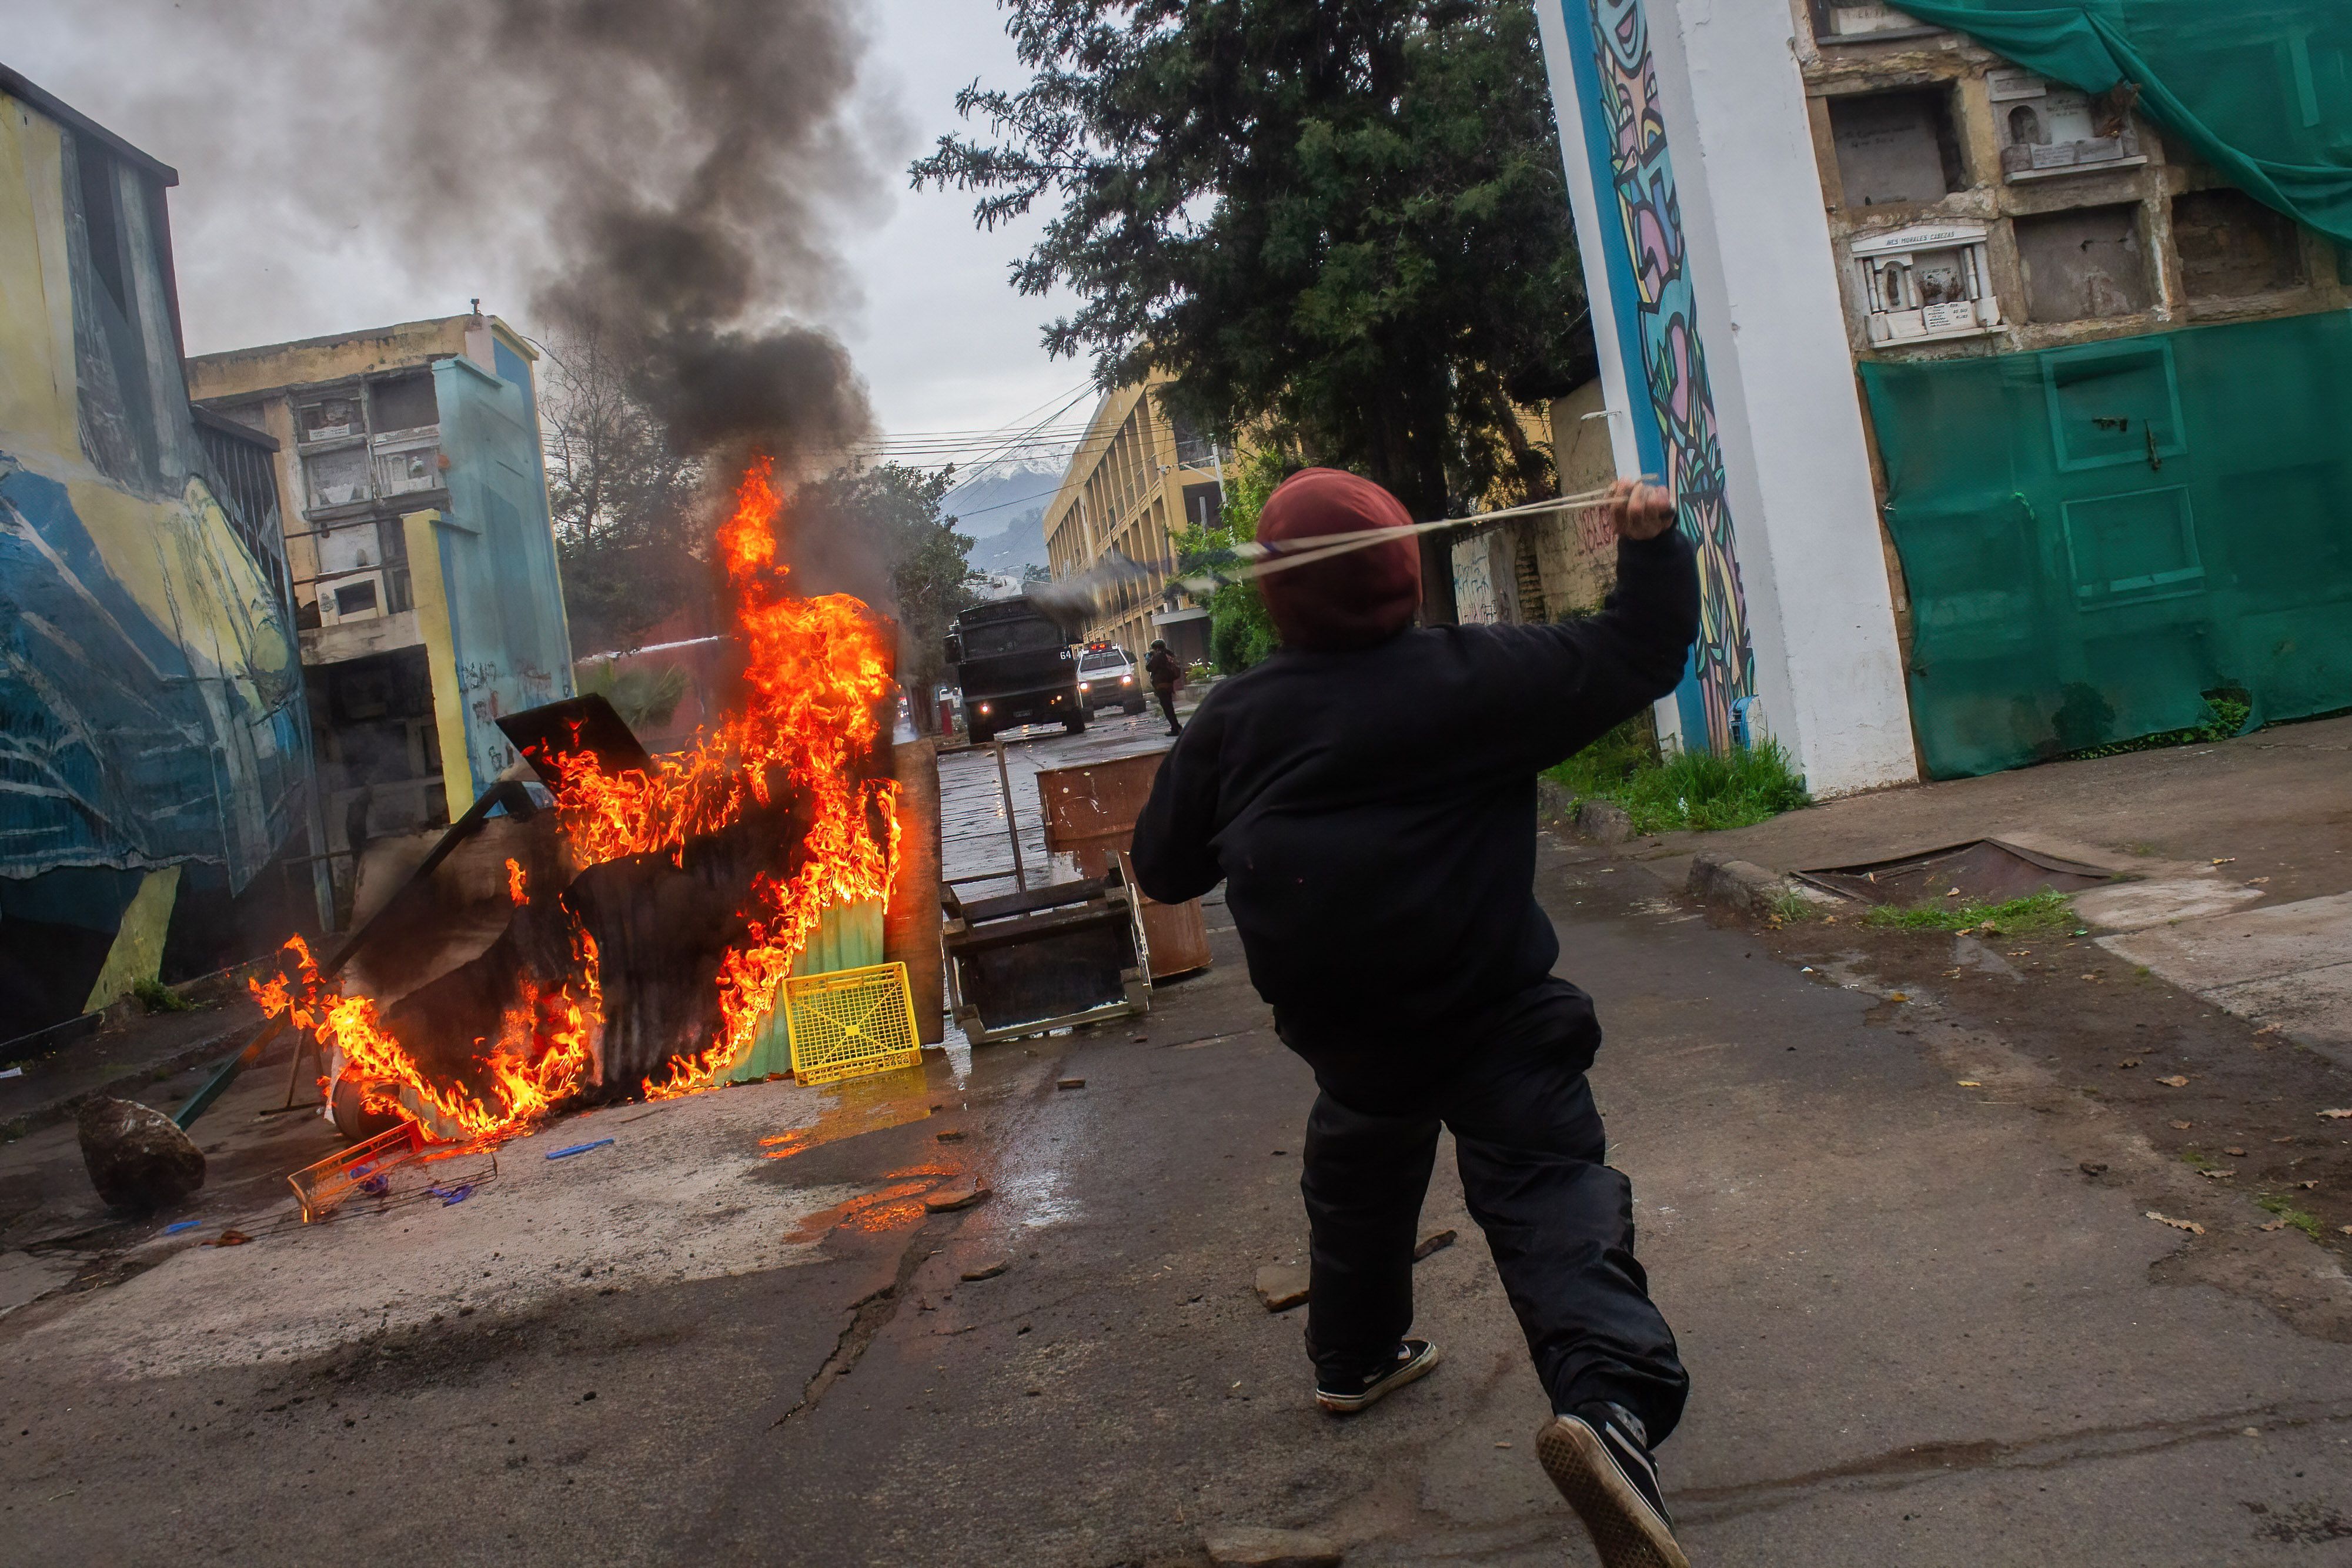 A short person, seen only from behind, throws a stick at a flame after a protest in Chile. 